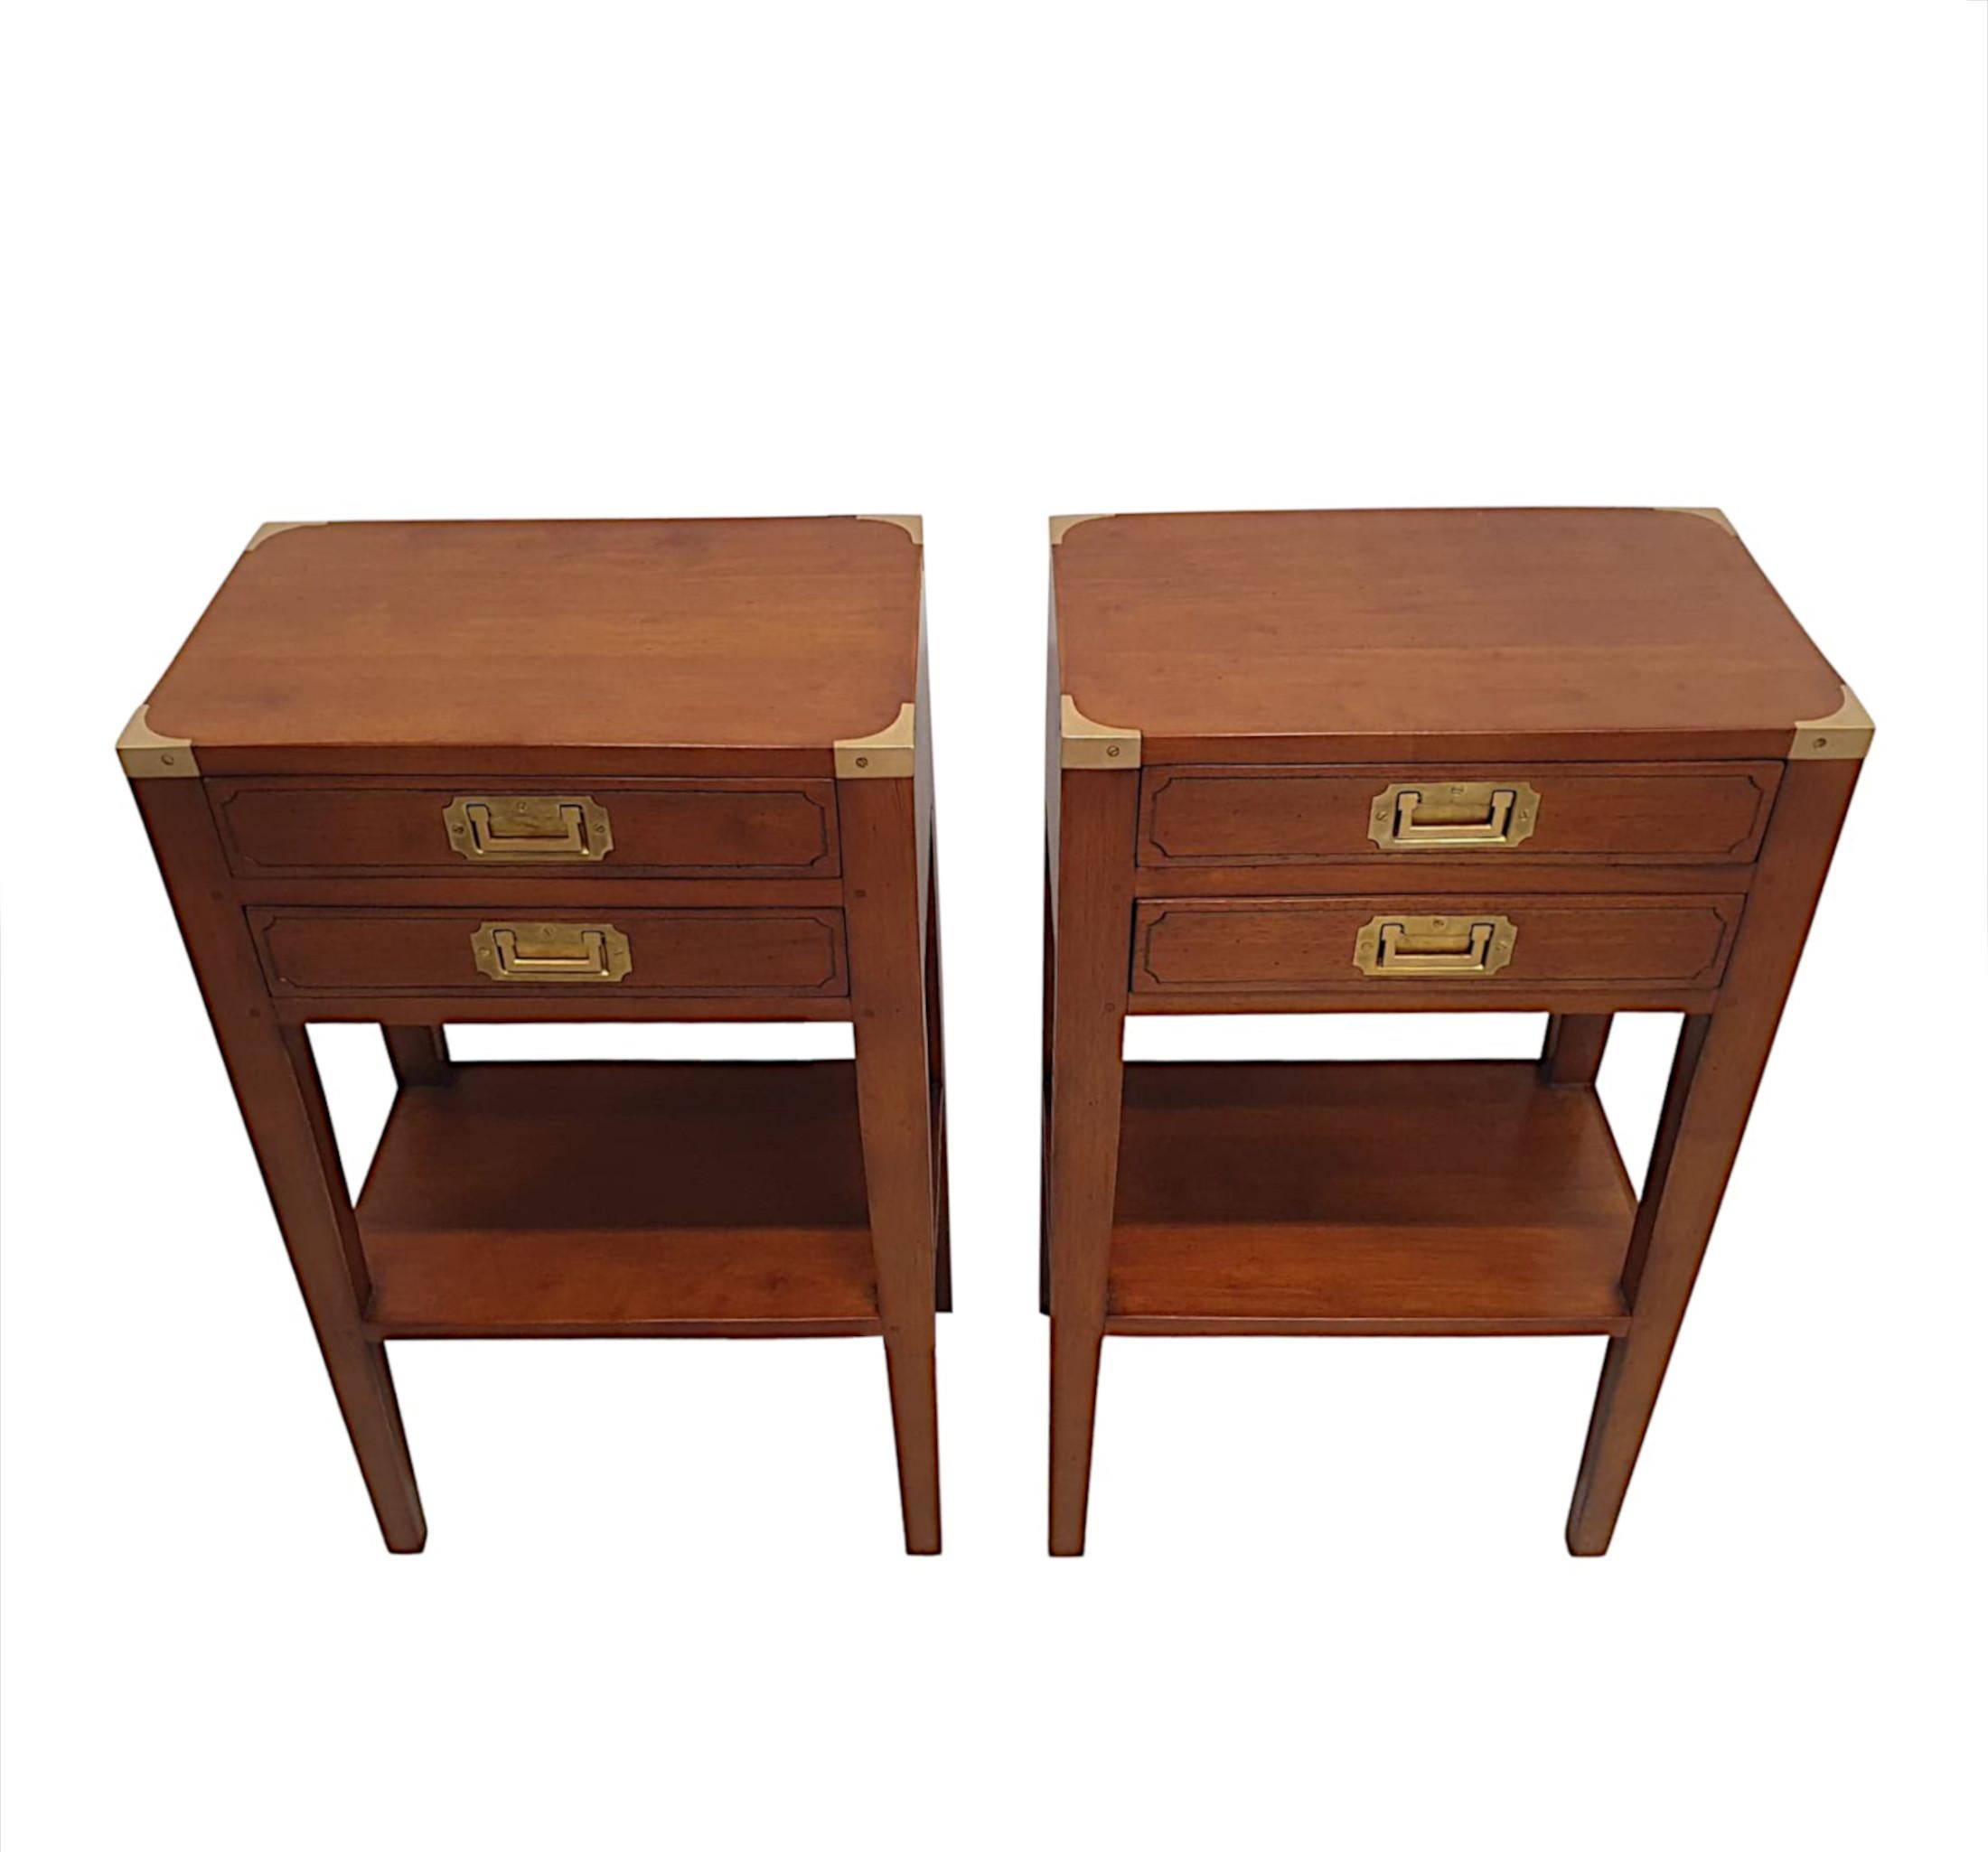 A fabulous pair of cherrywood, brass mounted campaign style side tables, of exceptional quality and with superb patination to the wood.  The moulded top of rectangular form fitted with brass corner mounts is raised over two panelled drawers with